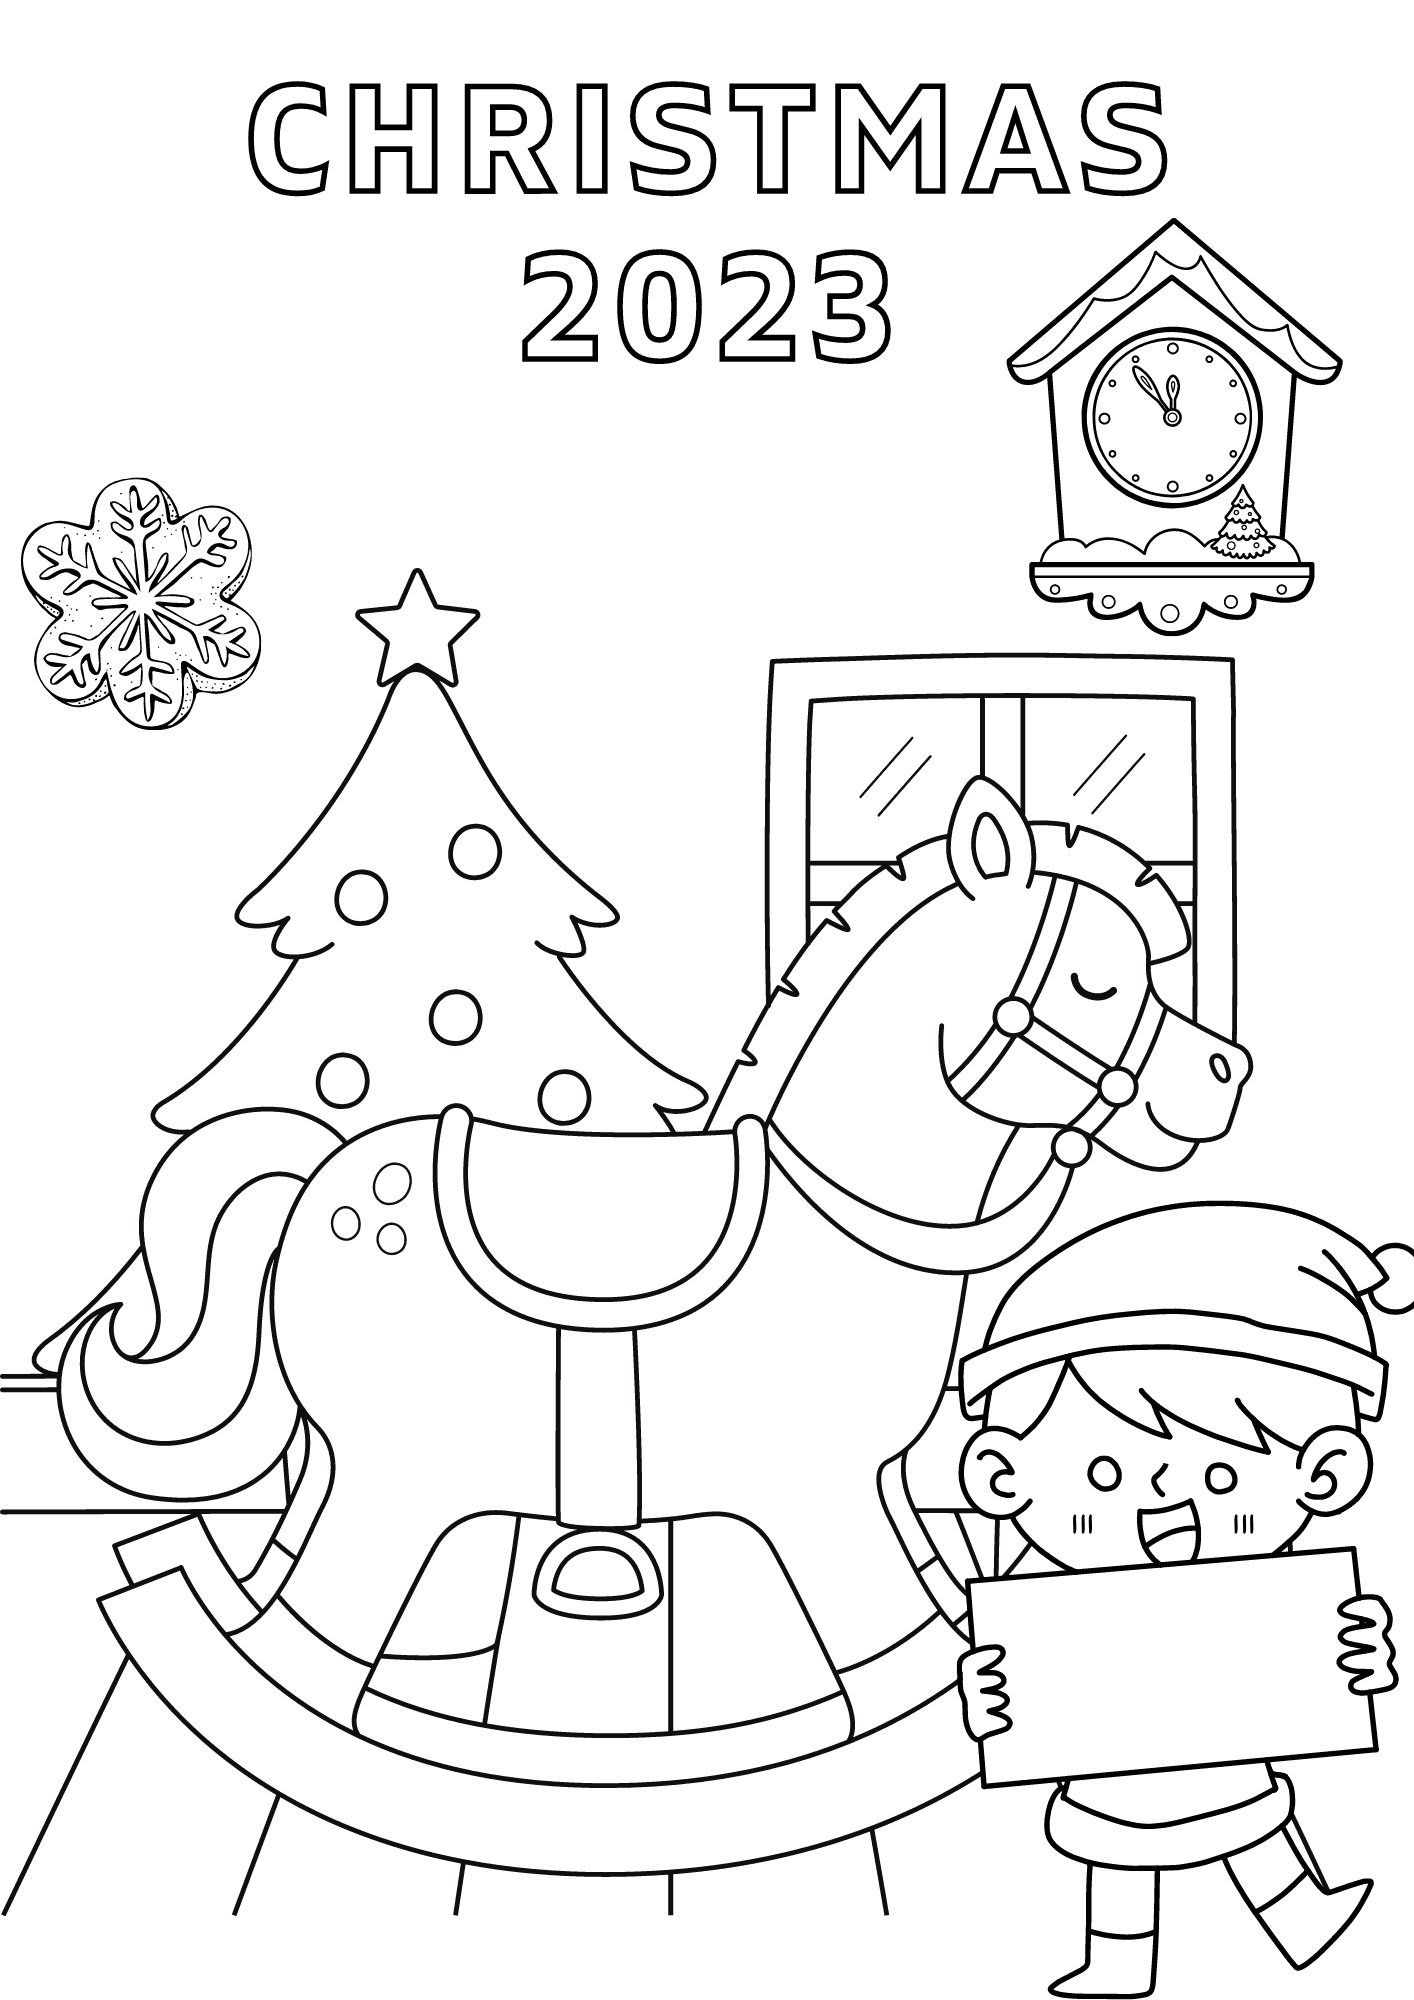 Christmas 2023 Image For Children Coloring Page